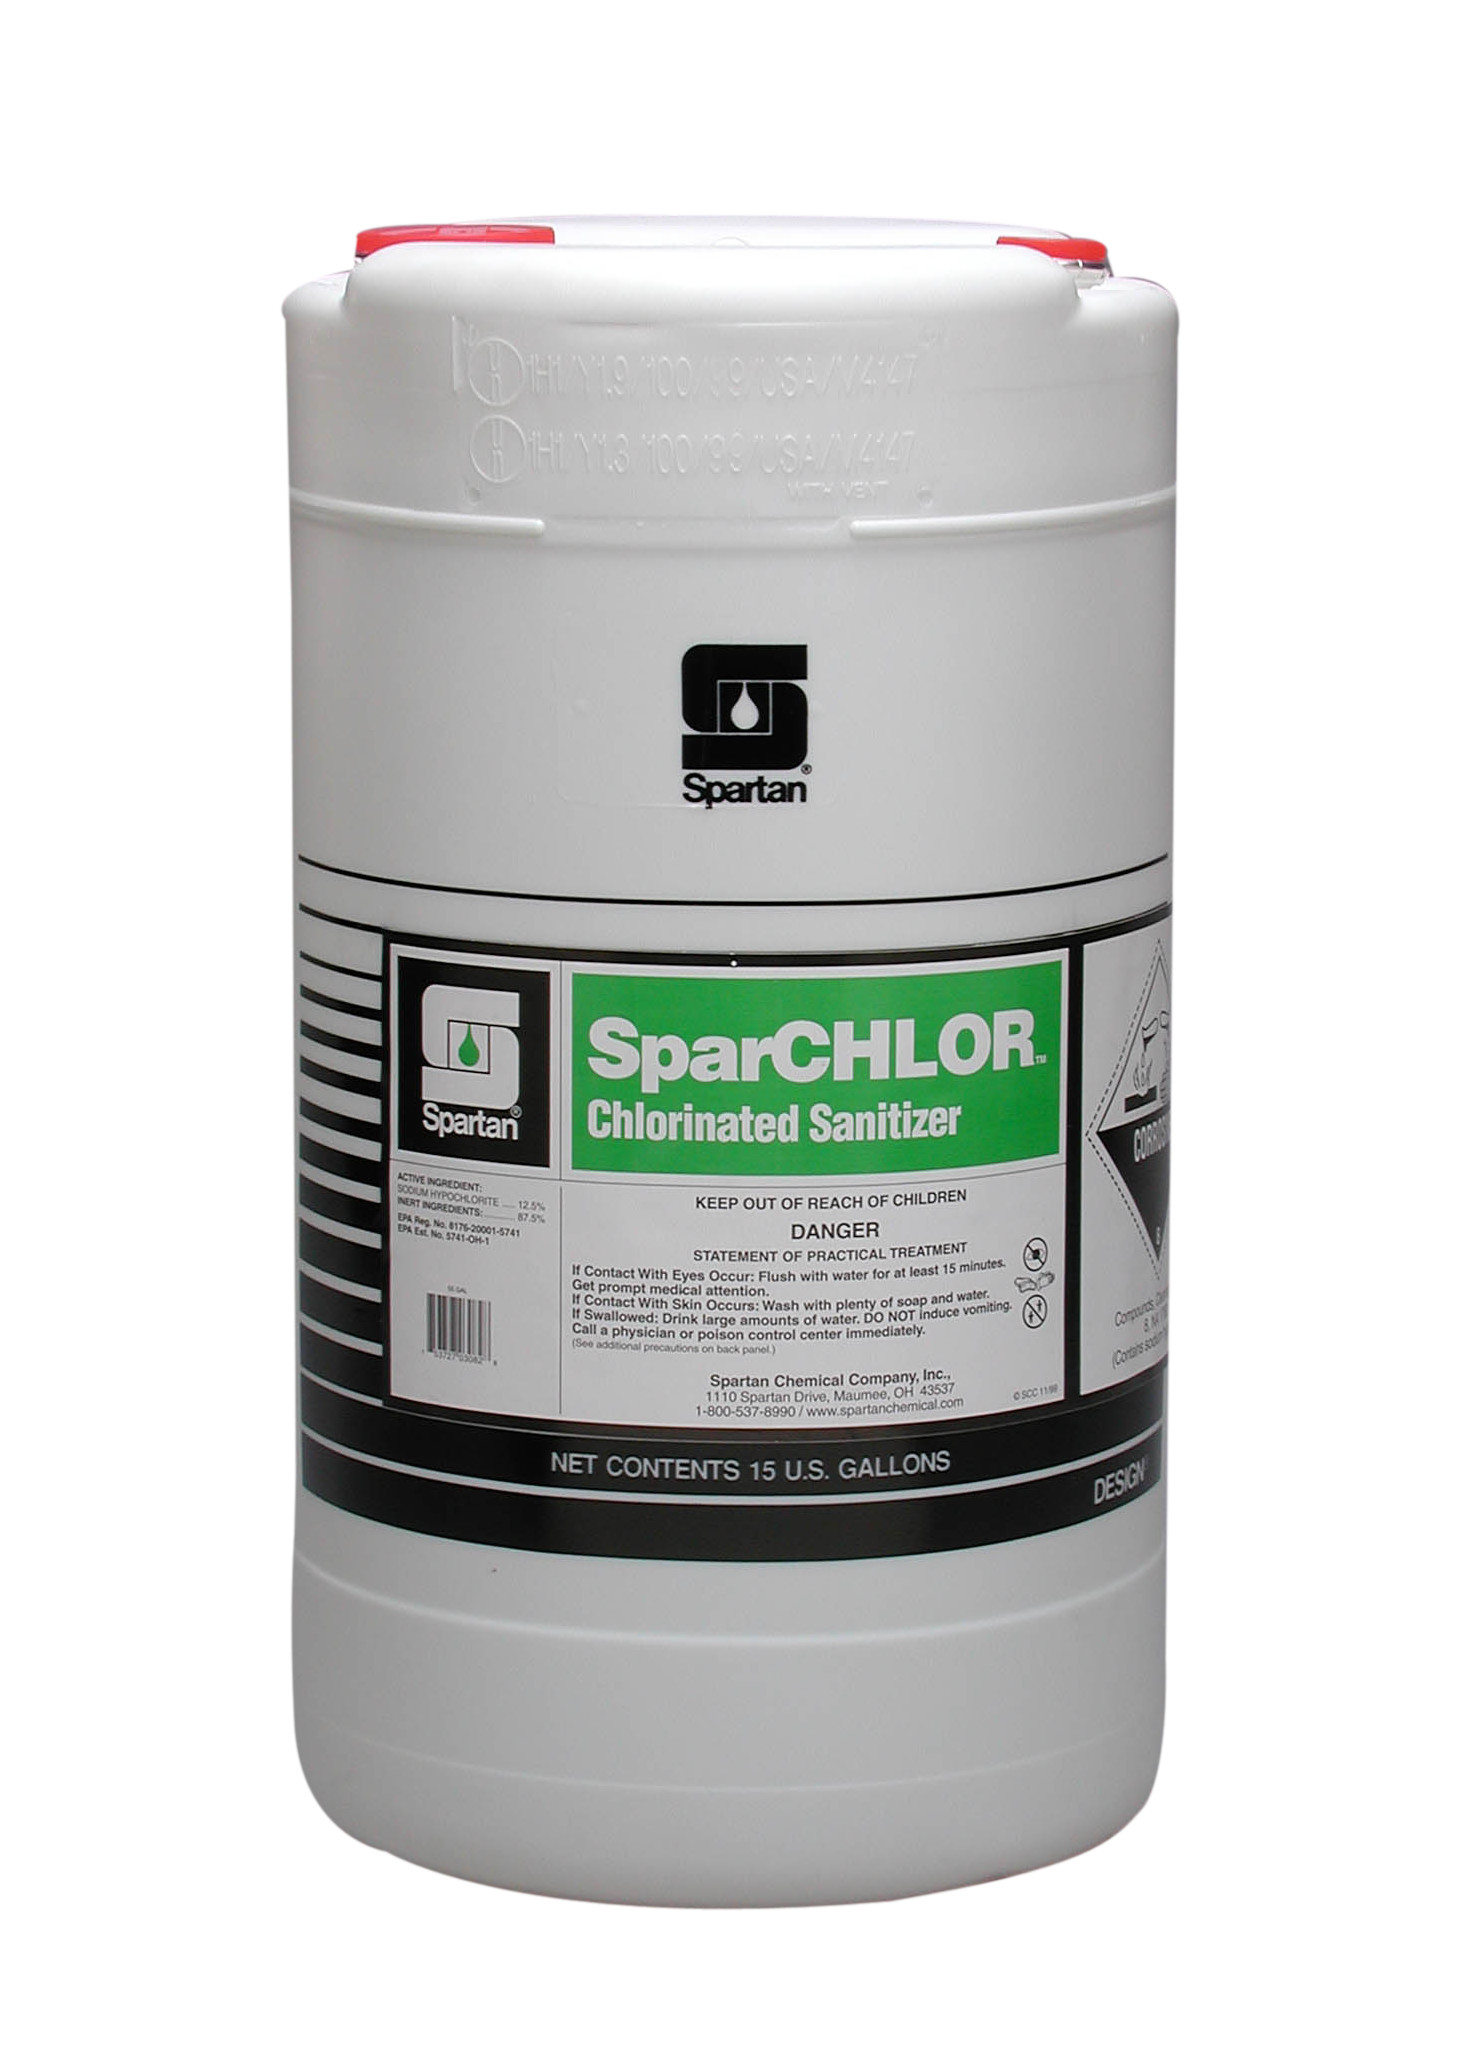 Spartan Chemical Company SparCHLOR, 15 GAL DRUM